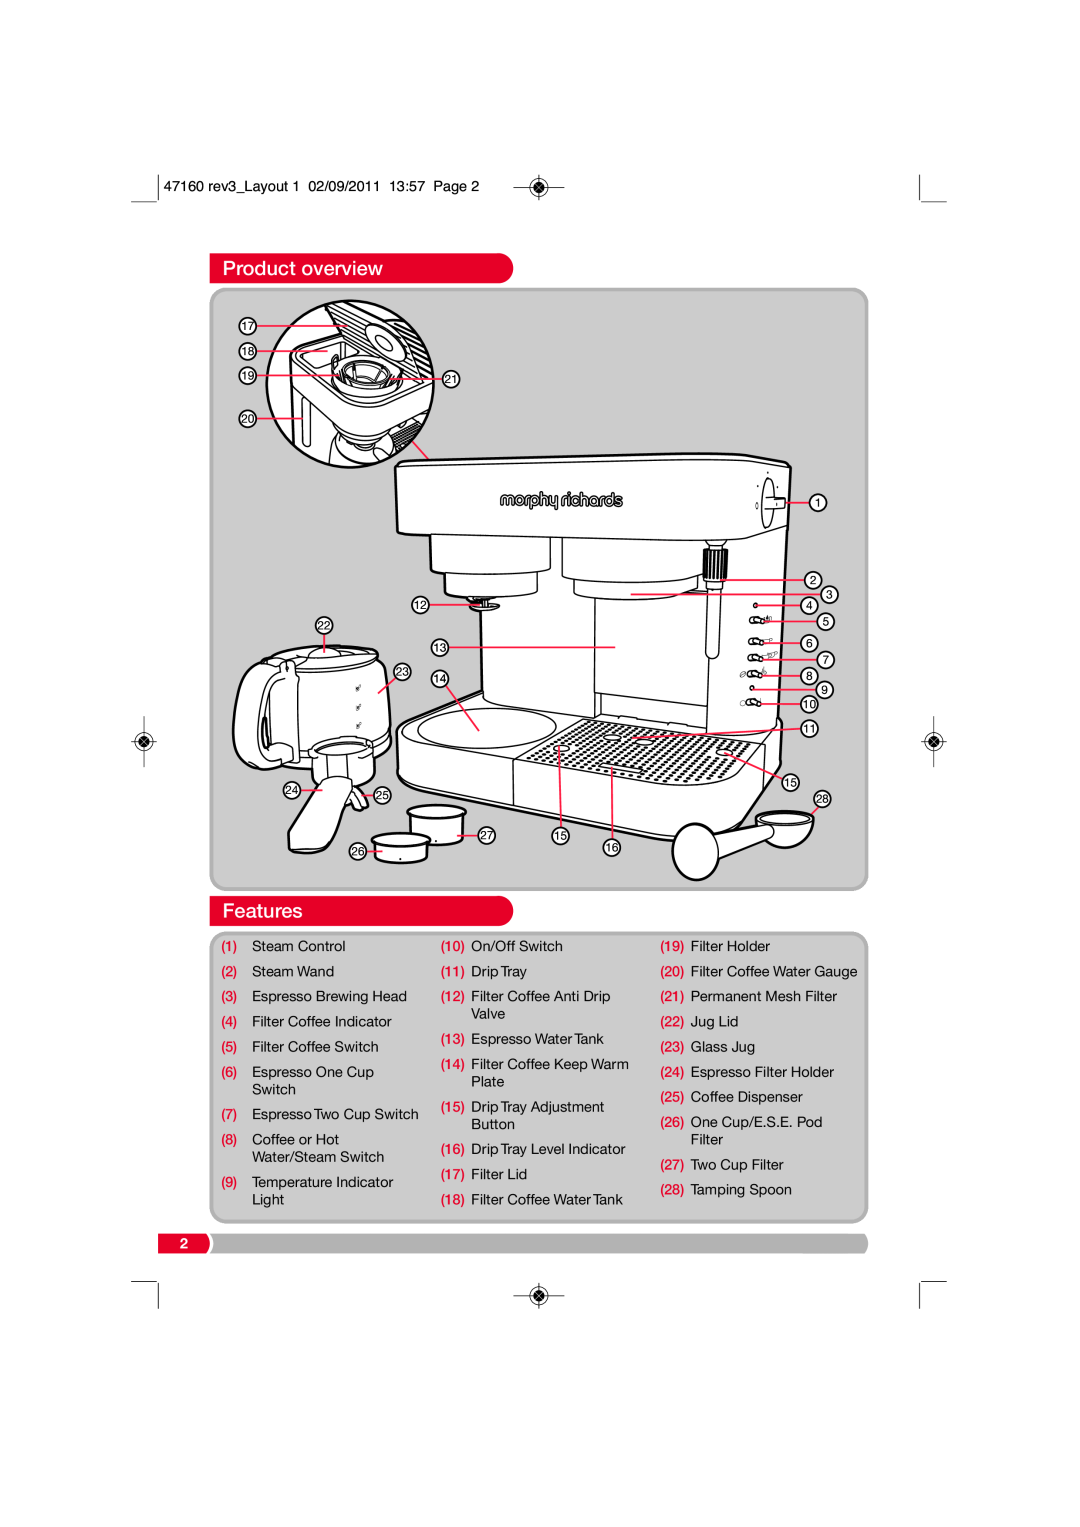 Morphy Richards 47160 manual Product overview, Features 